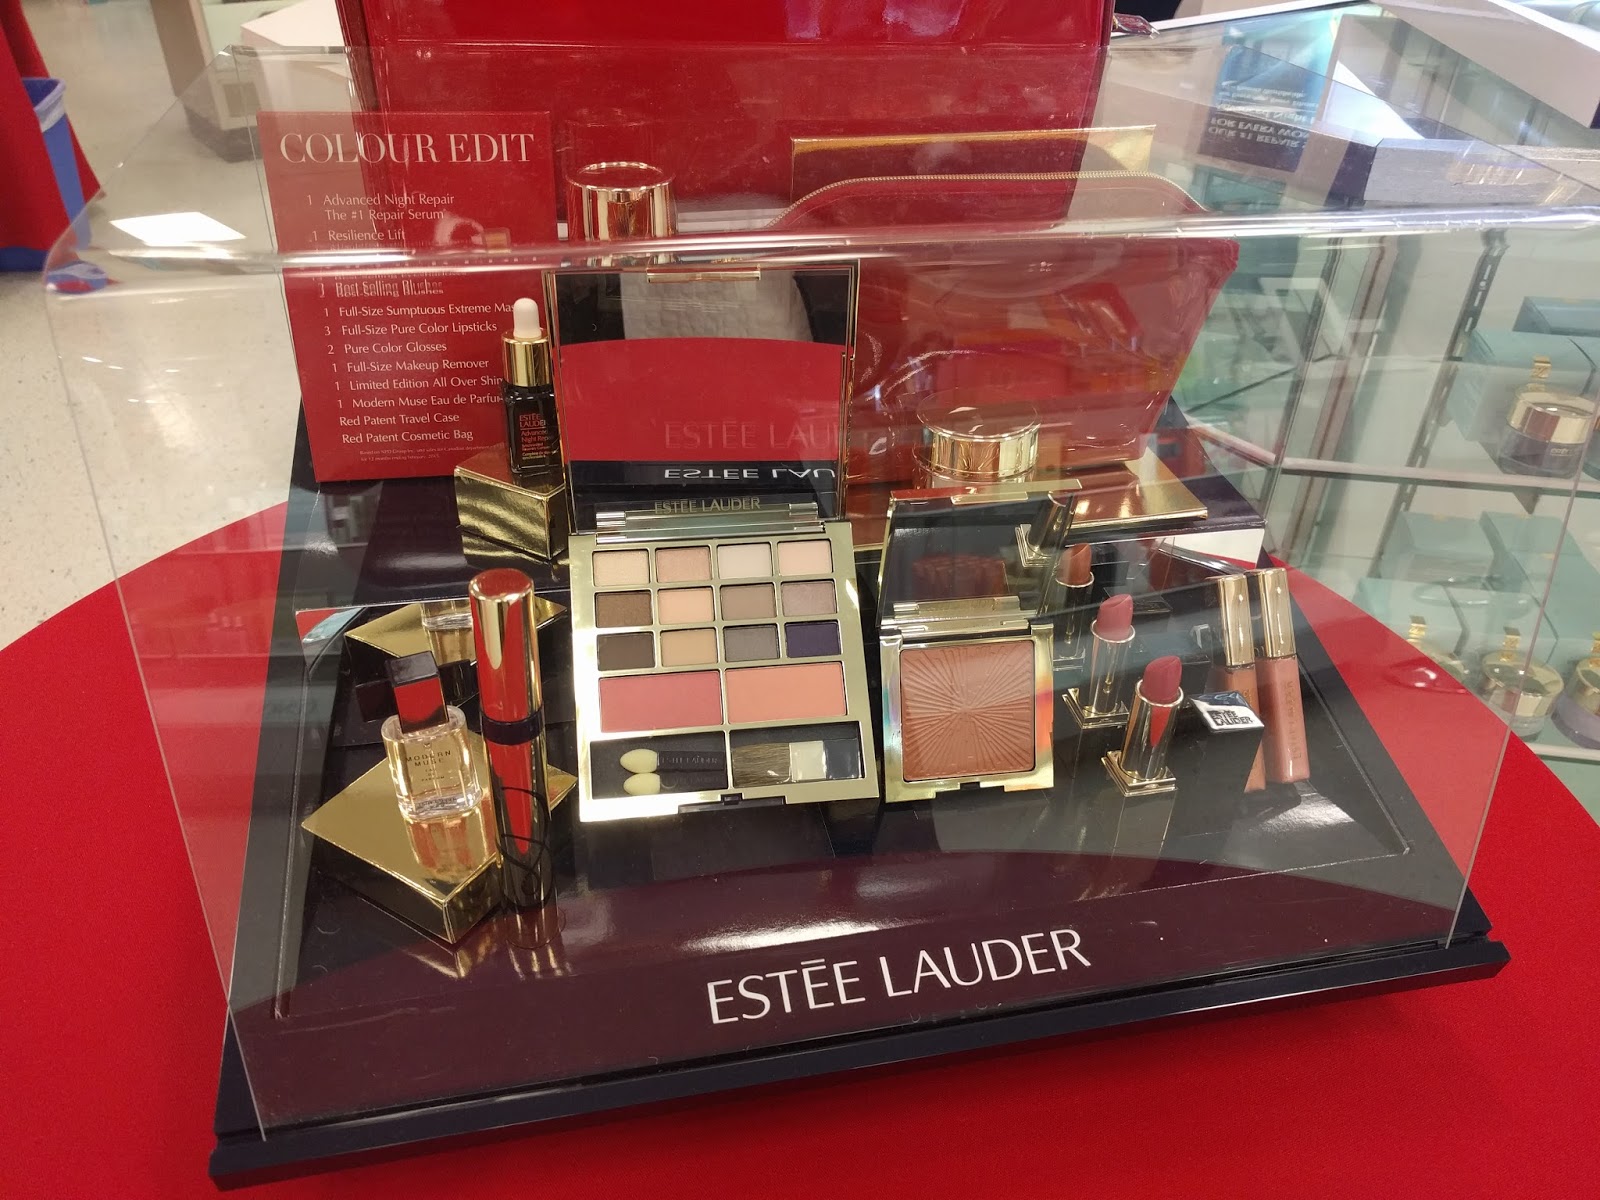 There Were A Ton Of Purchase With Gifts And The Estee Lauder One Looked Amazing That Palette Bronzer Ah Lancome Gift Is My